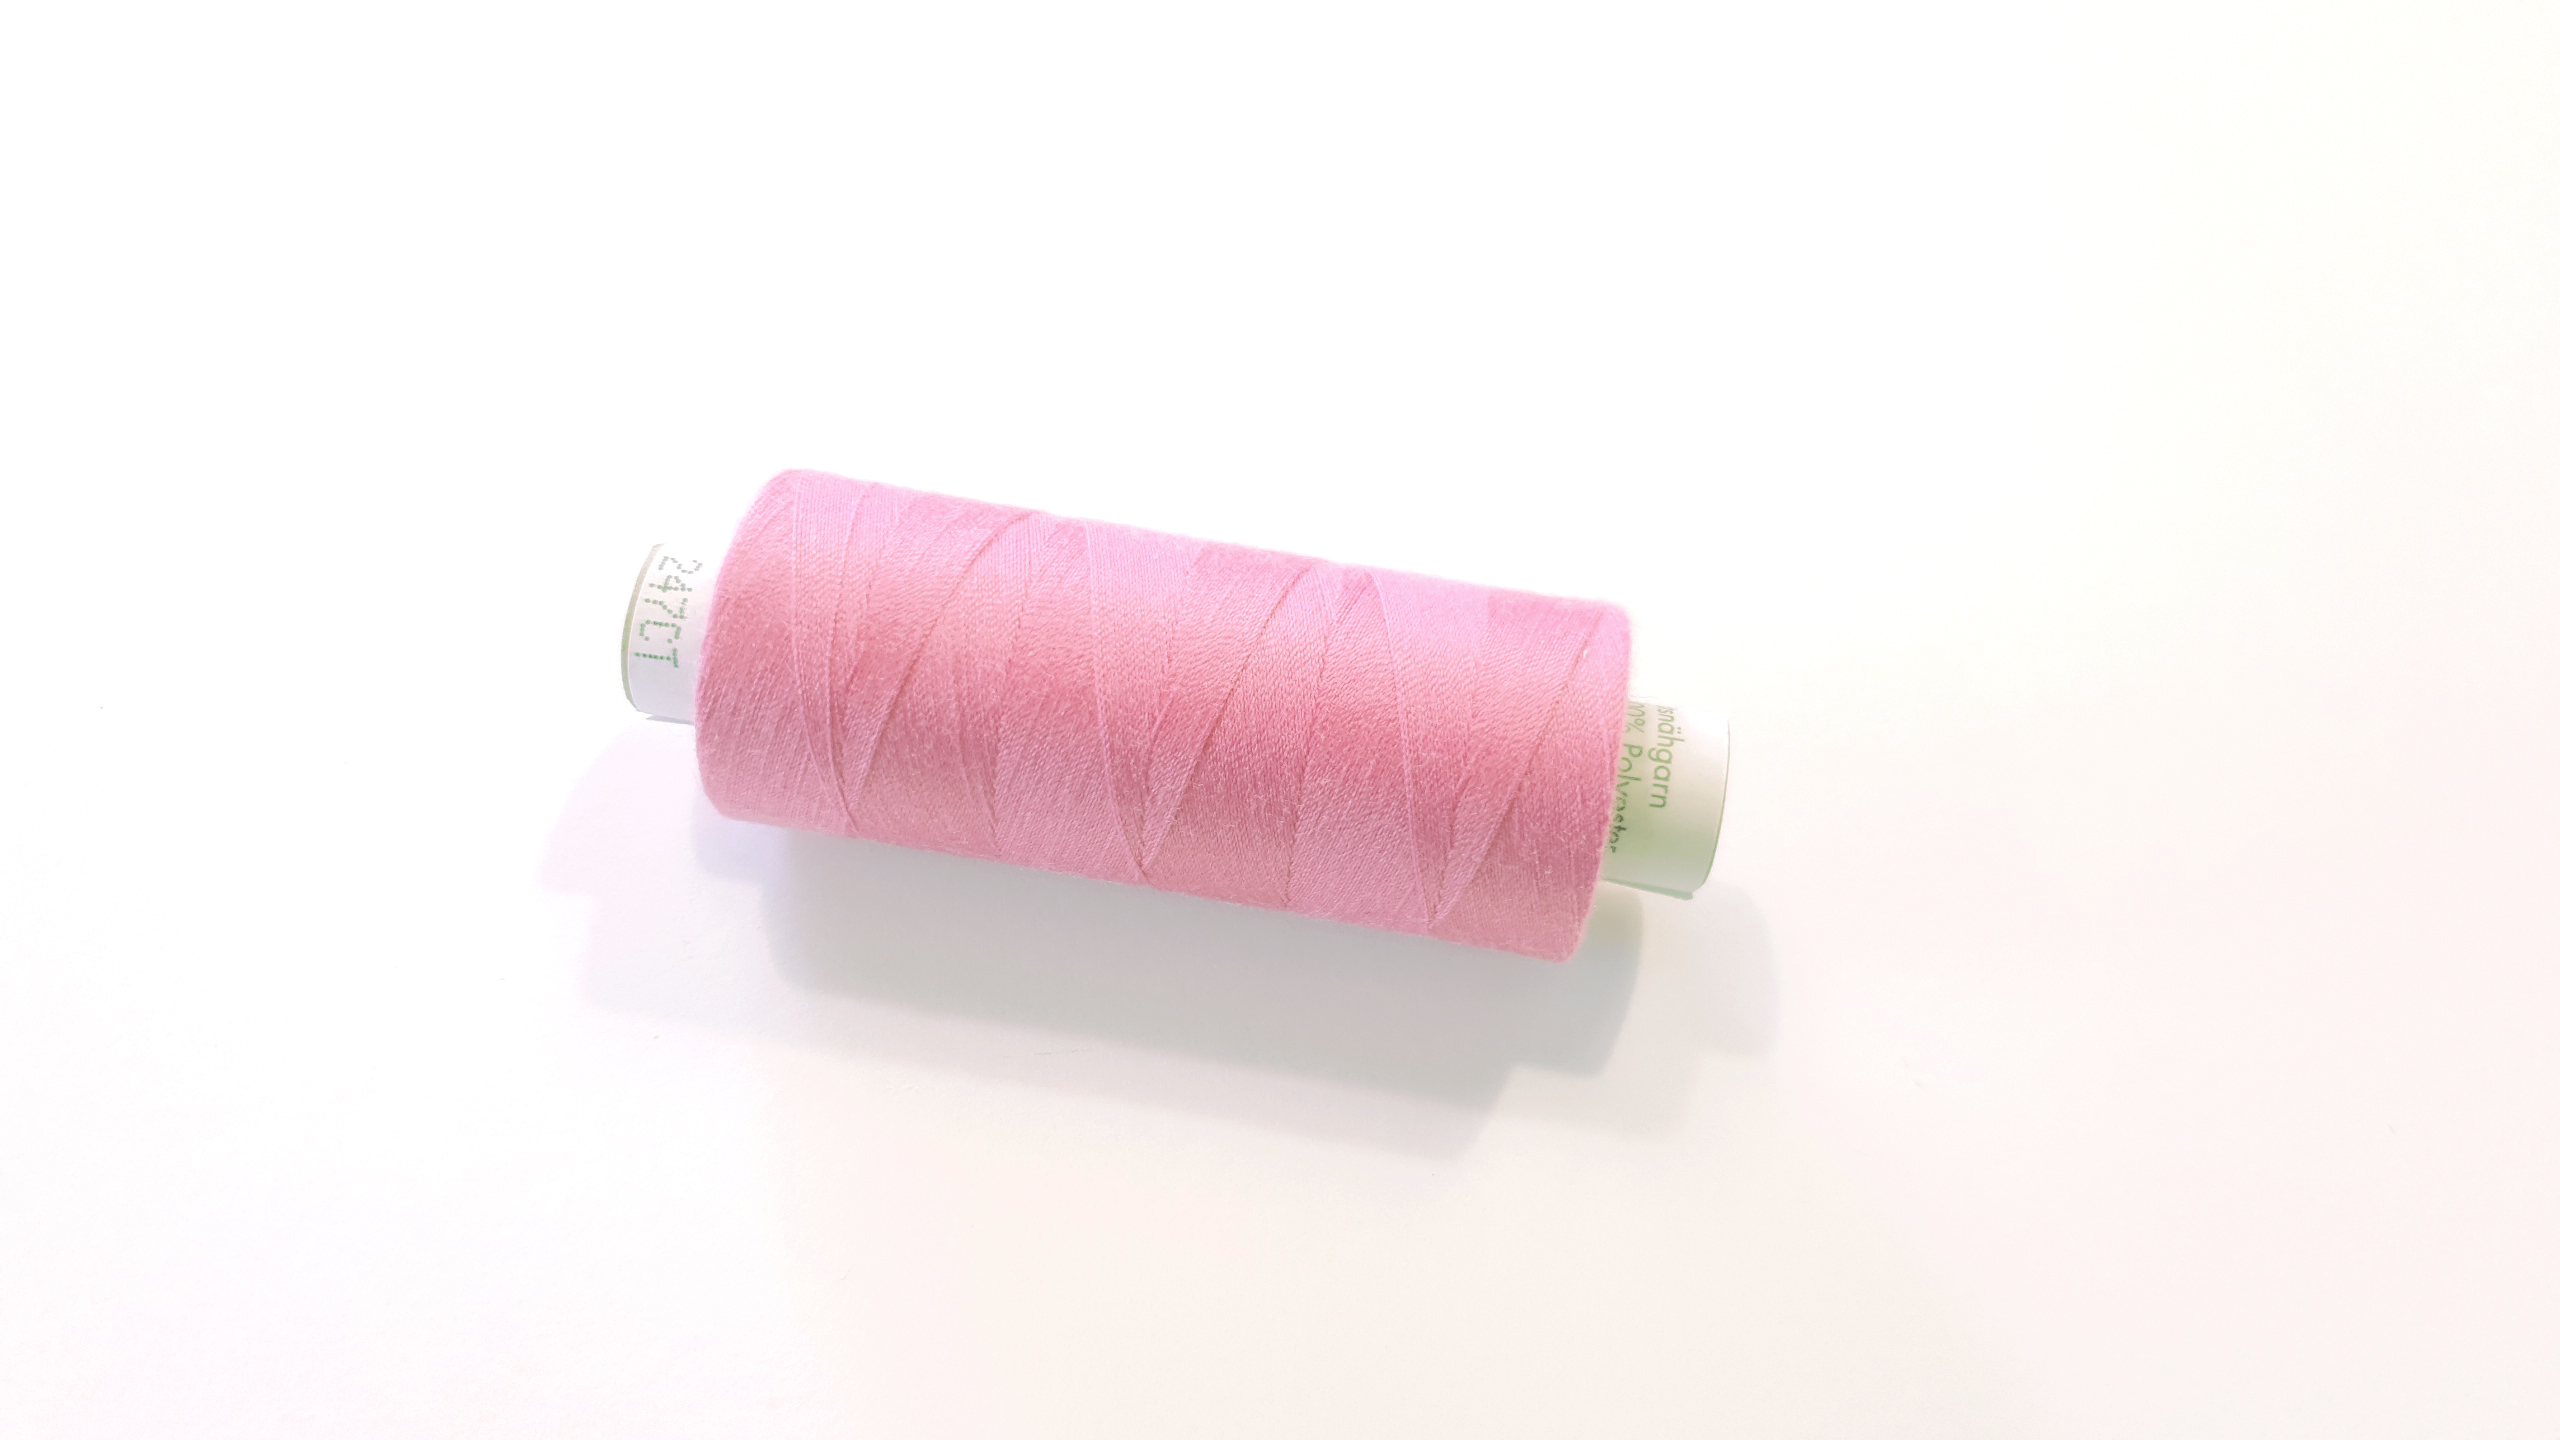 Sewing thread 500m- baby pink 1063